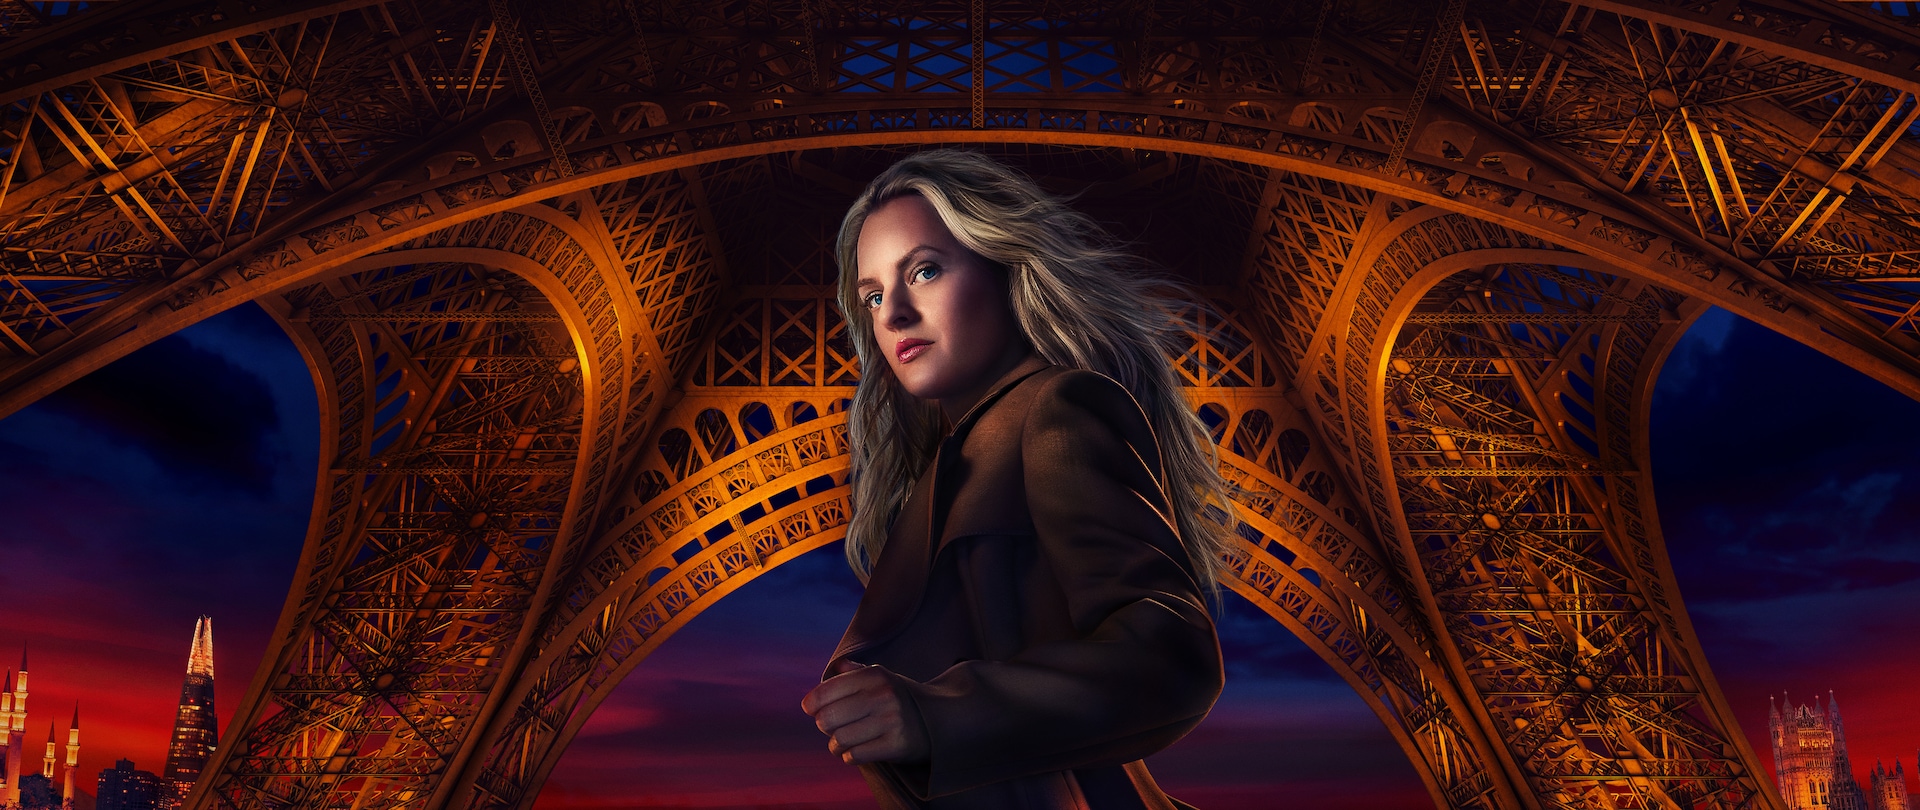 Blonde woman in a brown peacoat standing under the Eiffel Tower that's been lit up at night.